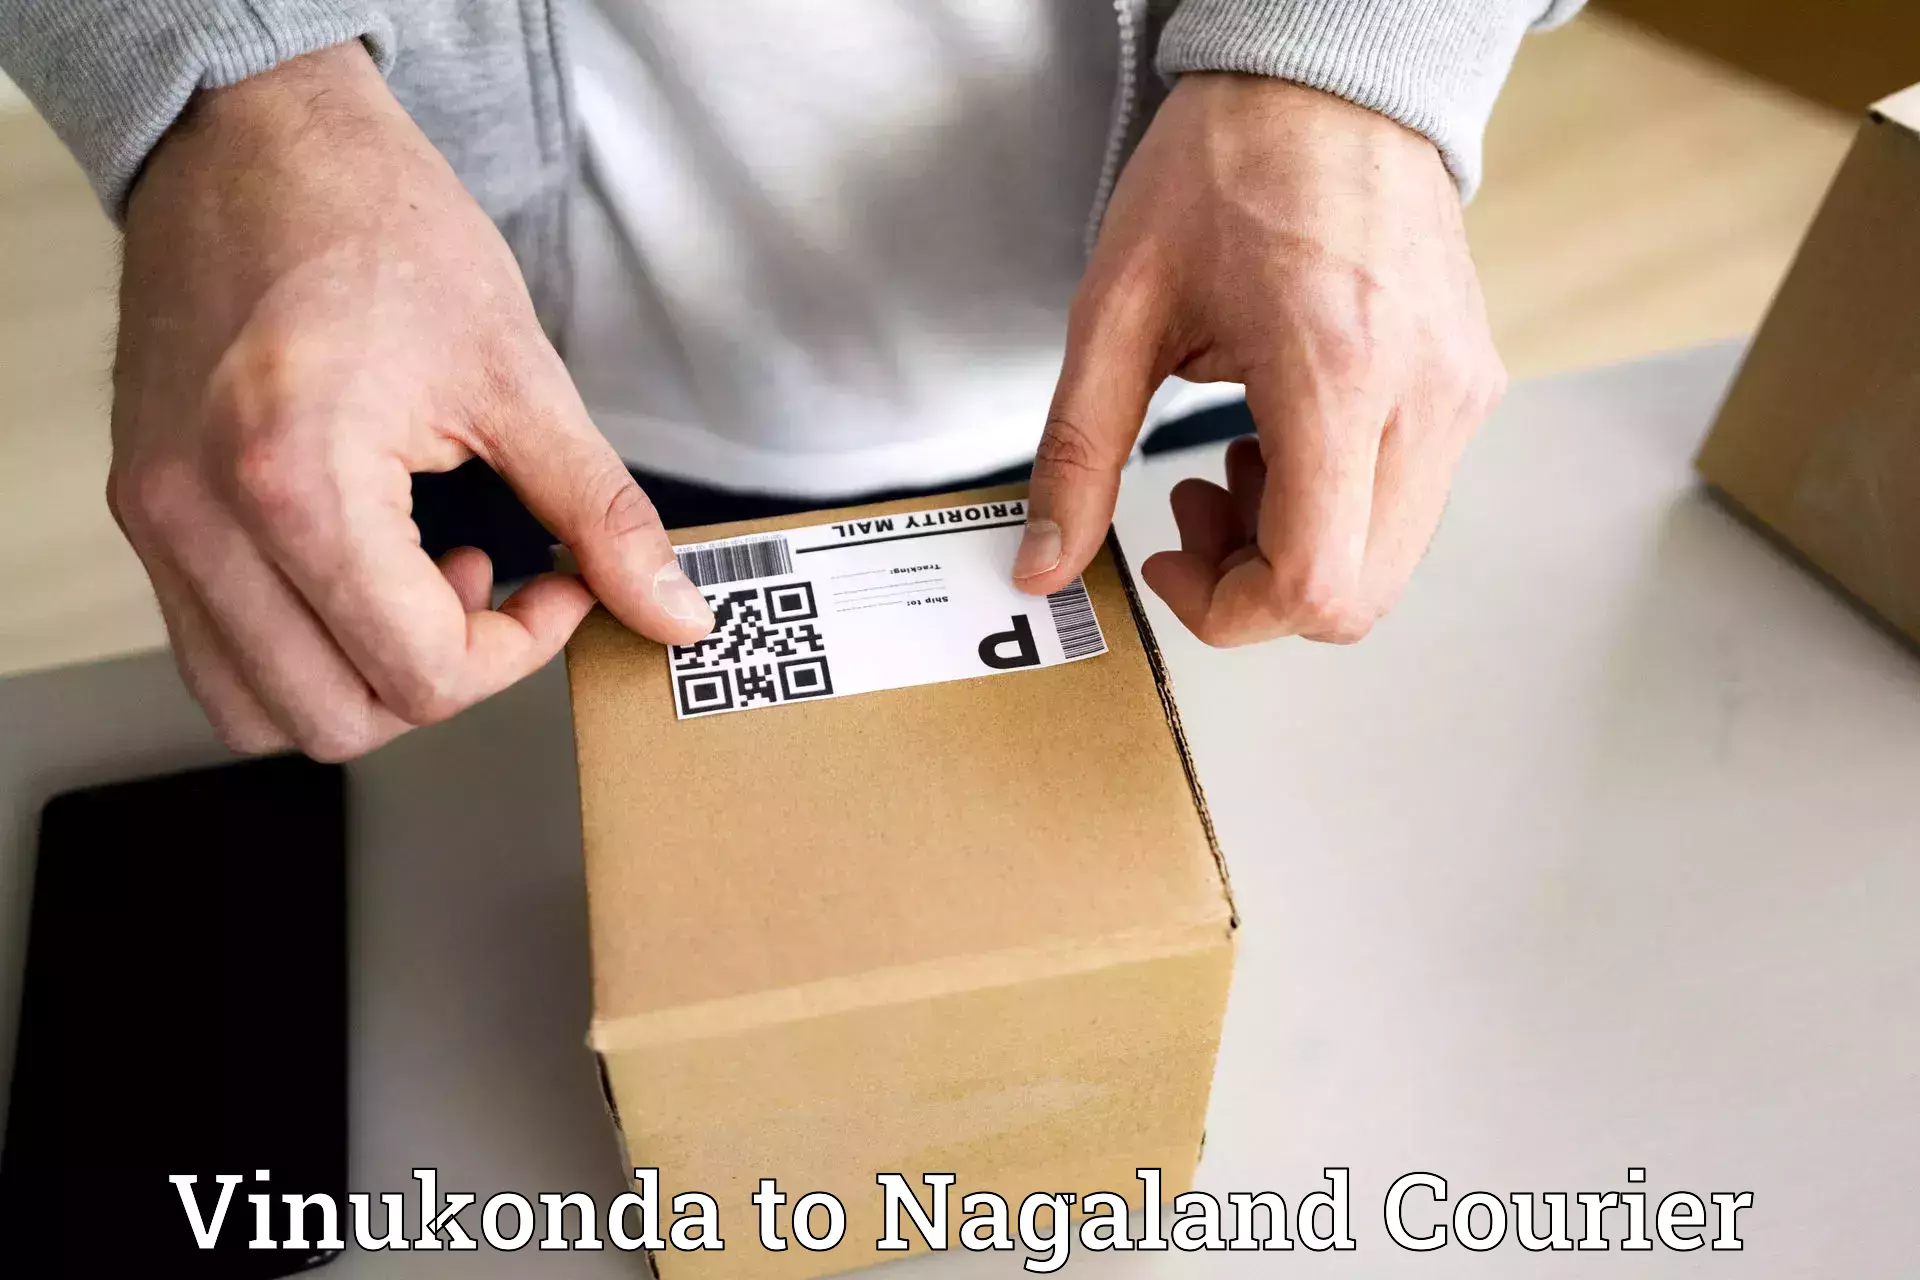 State-of-the-art courier technology Vinukonda to Kohima